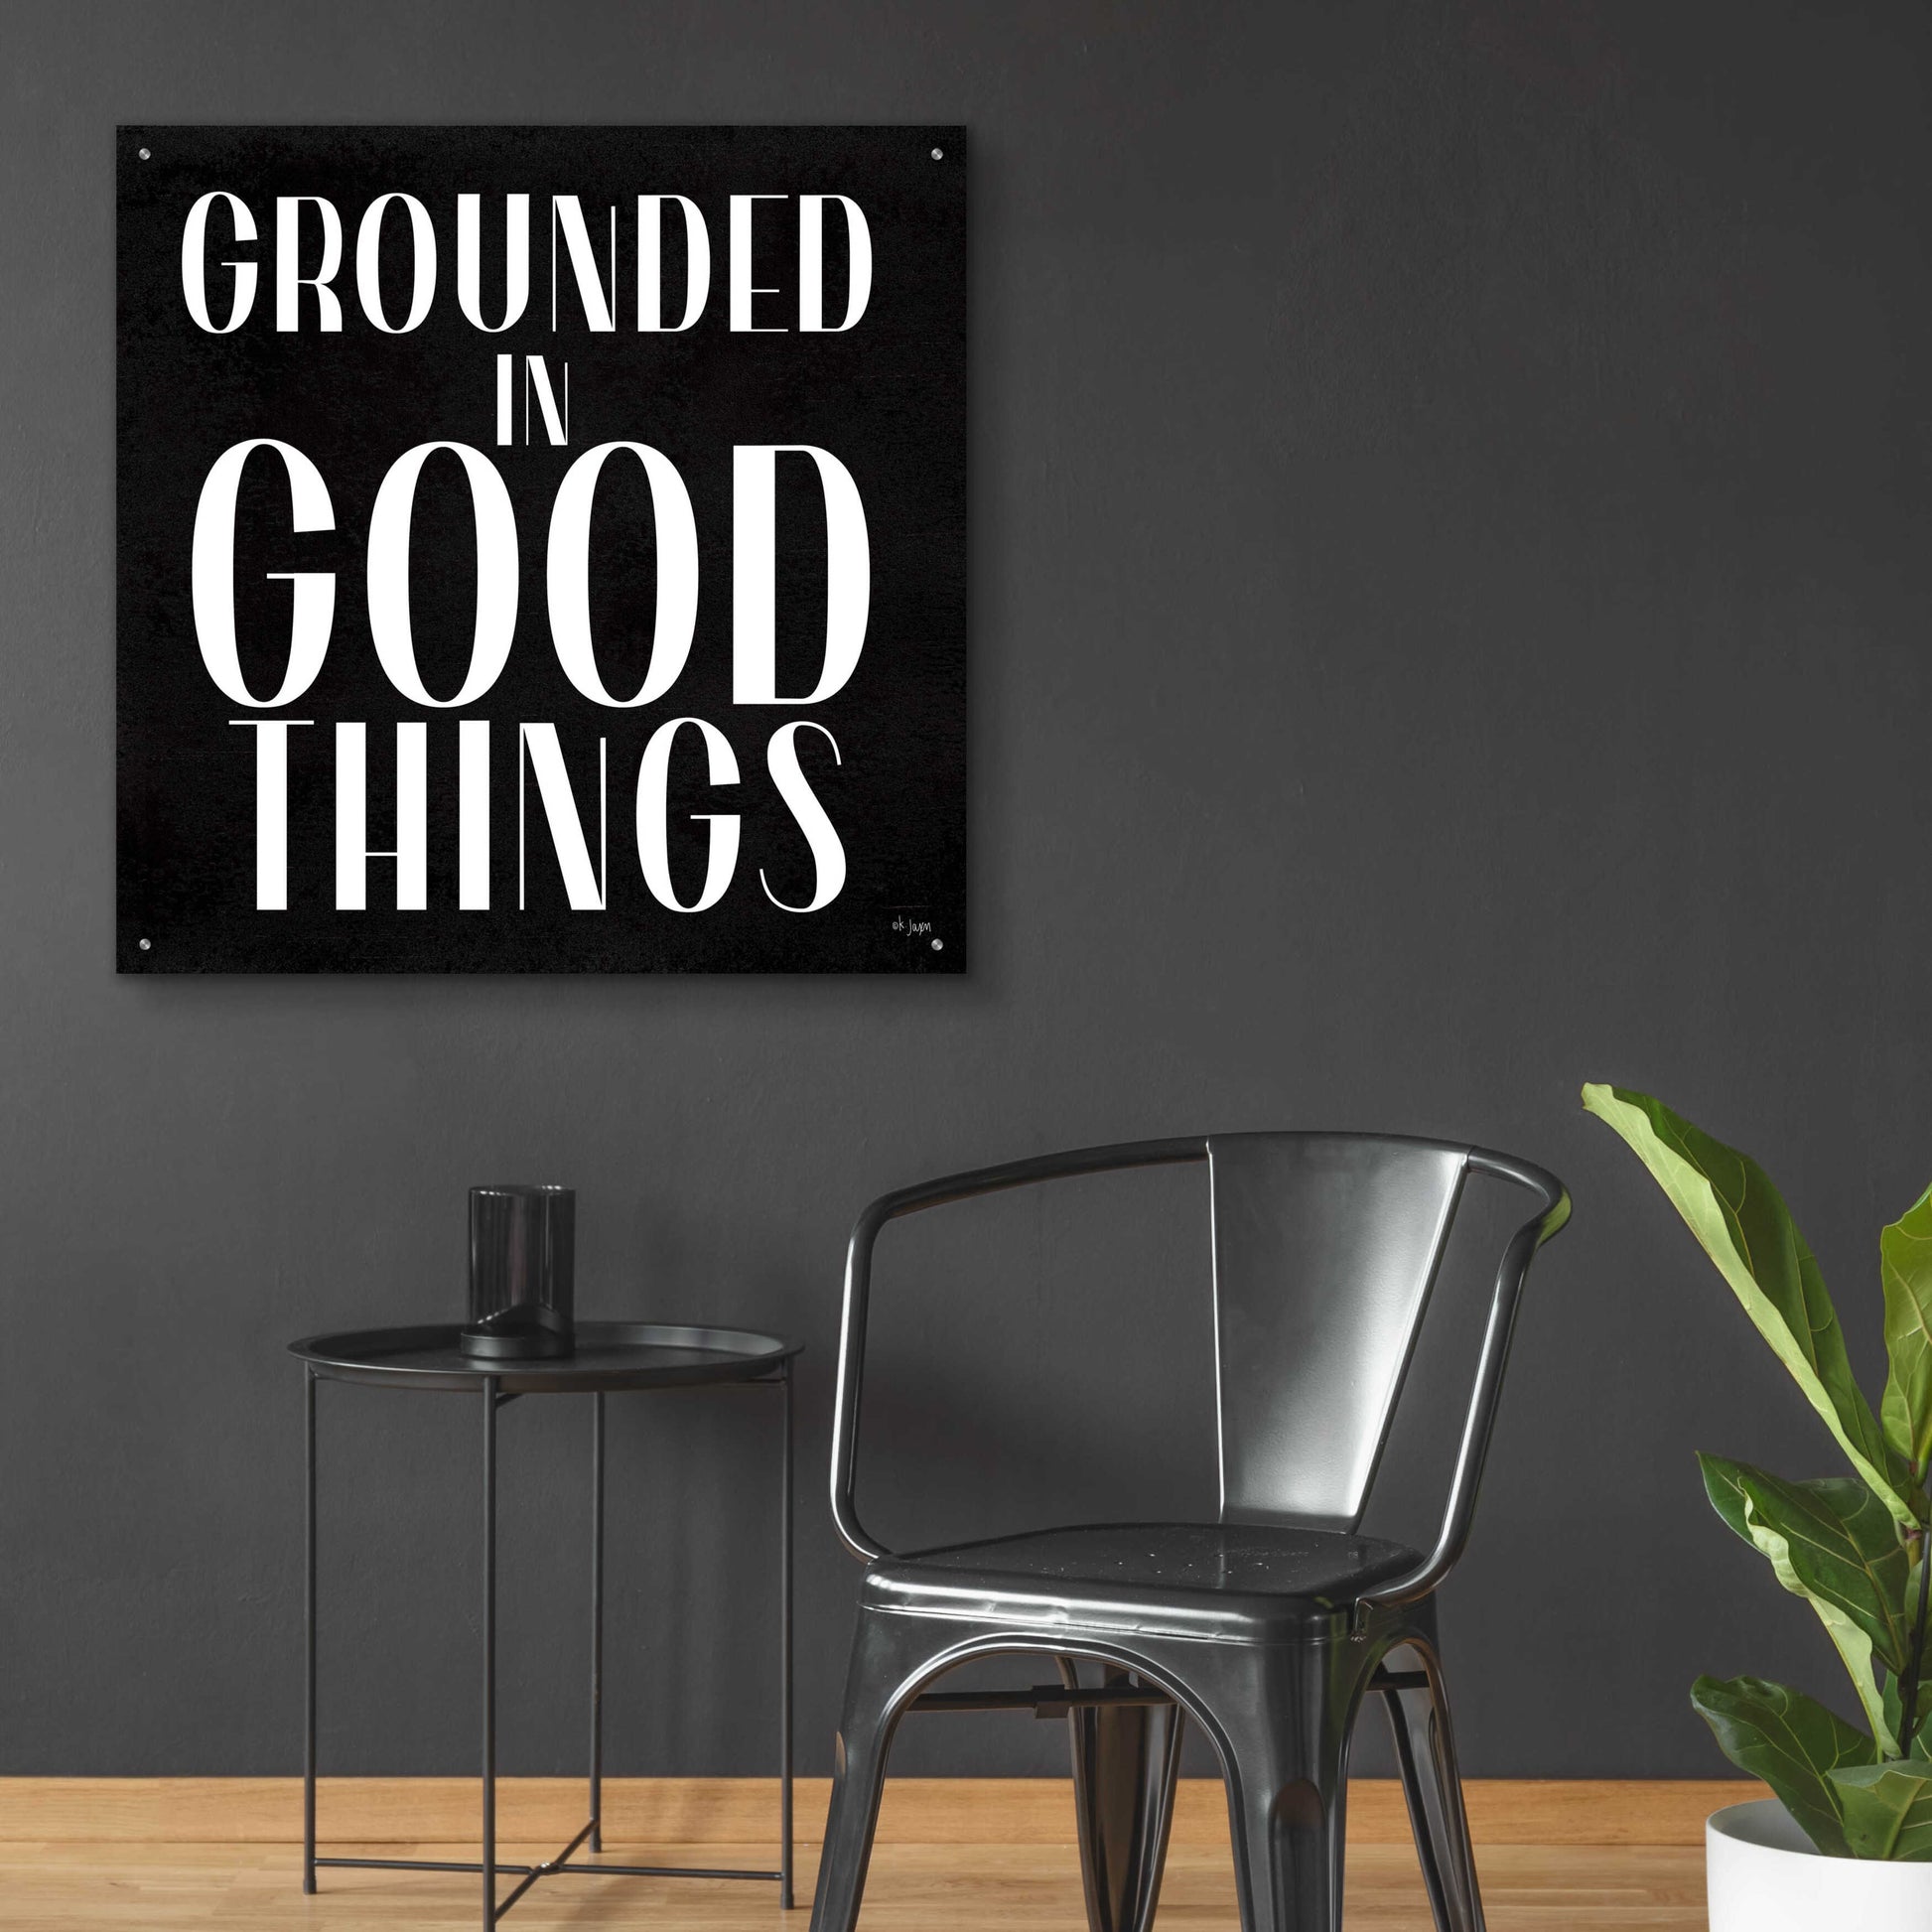 Epic Art 'Grounded in Good Things' by Jaxn Blvd., Acrylic Glass Wall Art,36x36